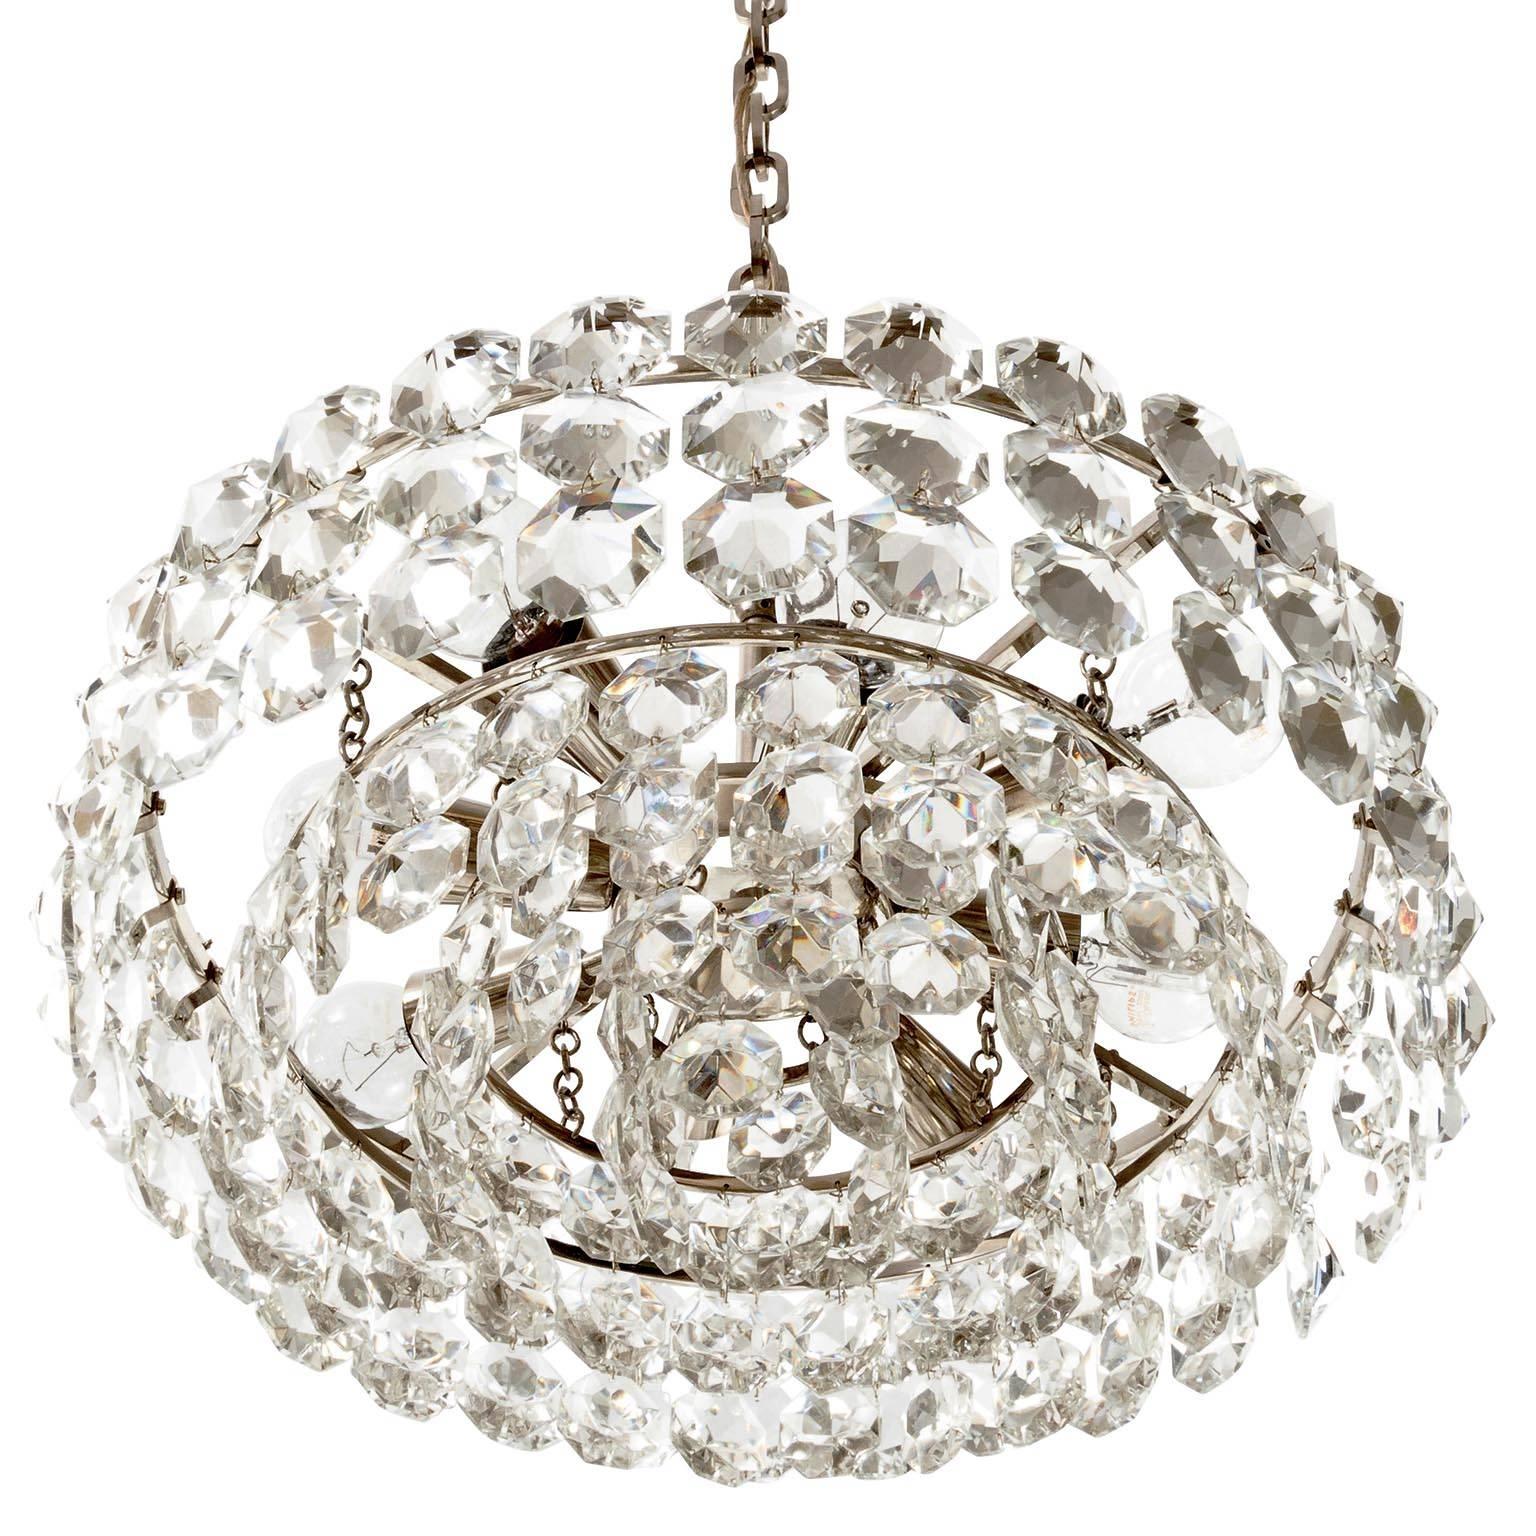 One of Two Bakalowits Chandeliers Pendant Lights, Nickel Glass, 1960s For Sale 2